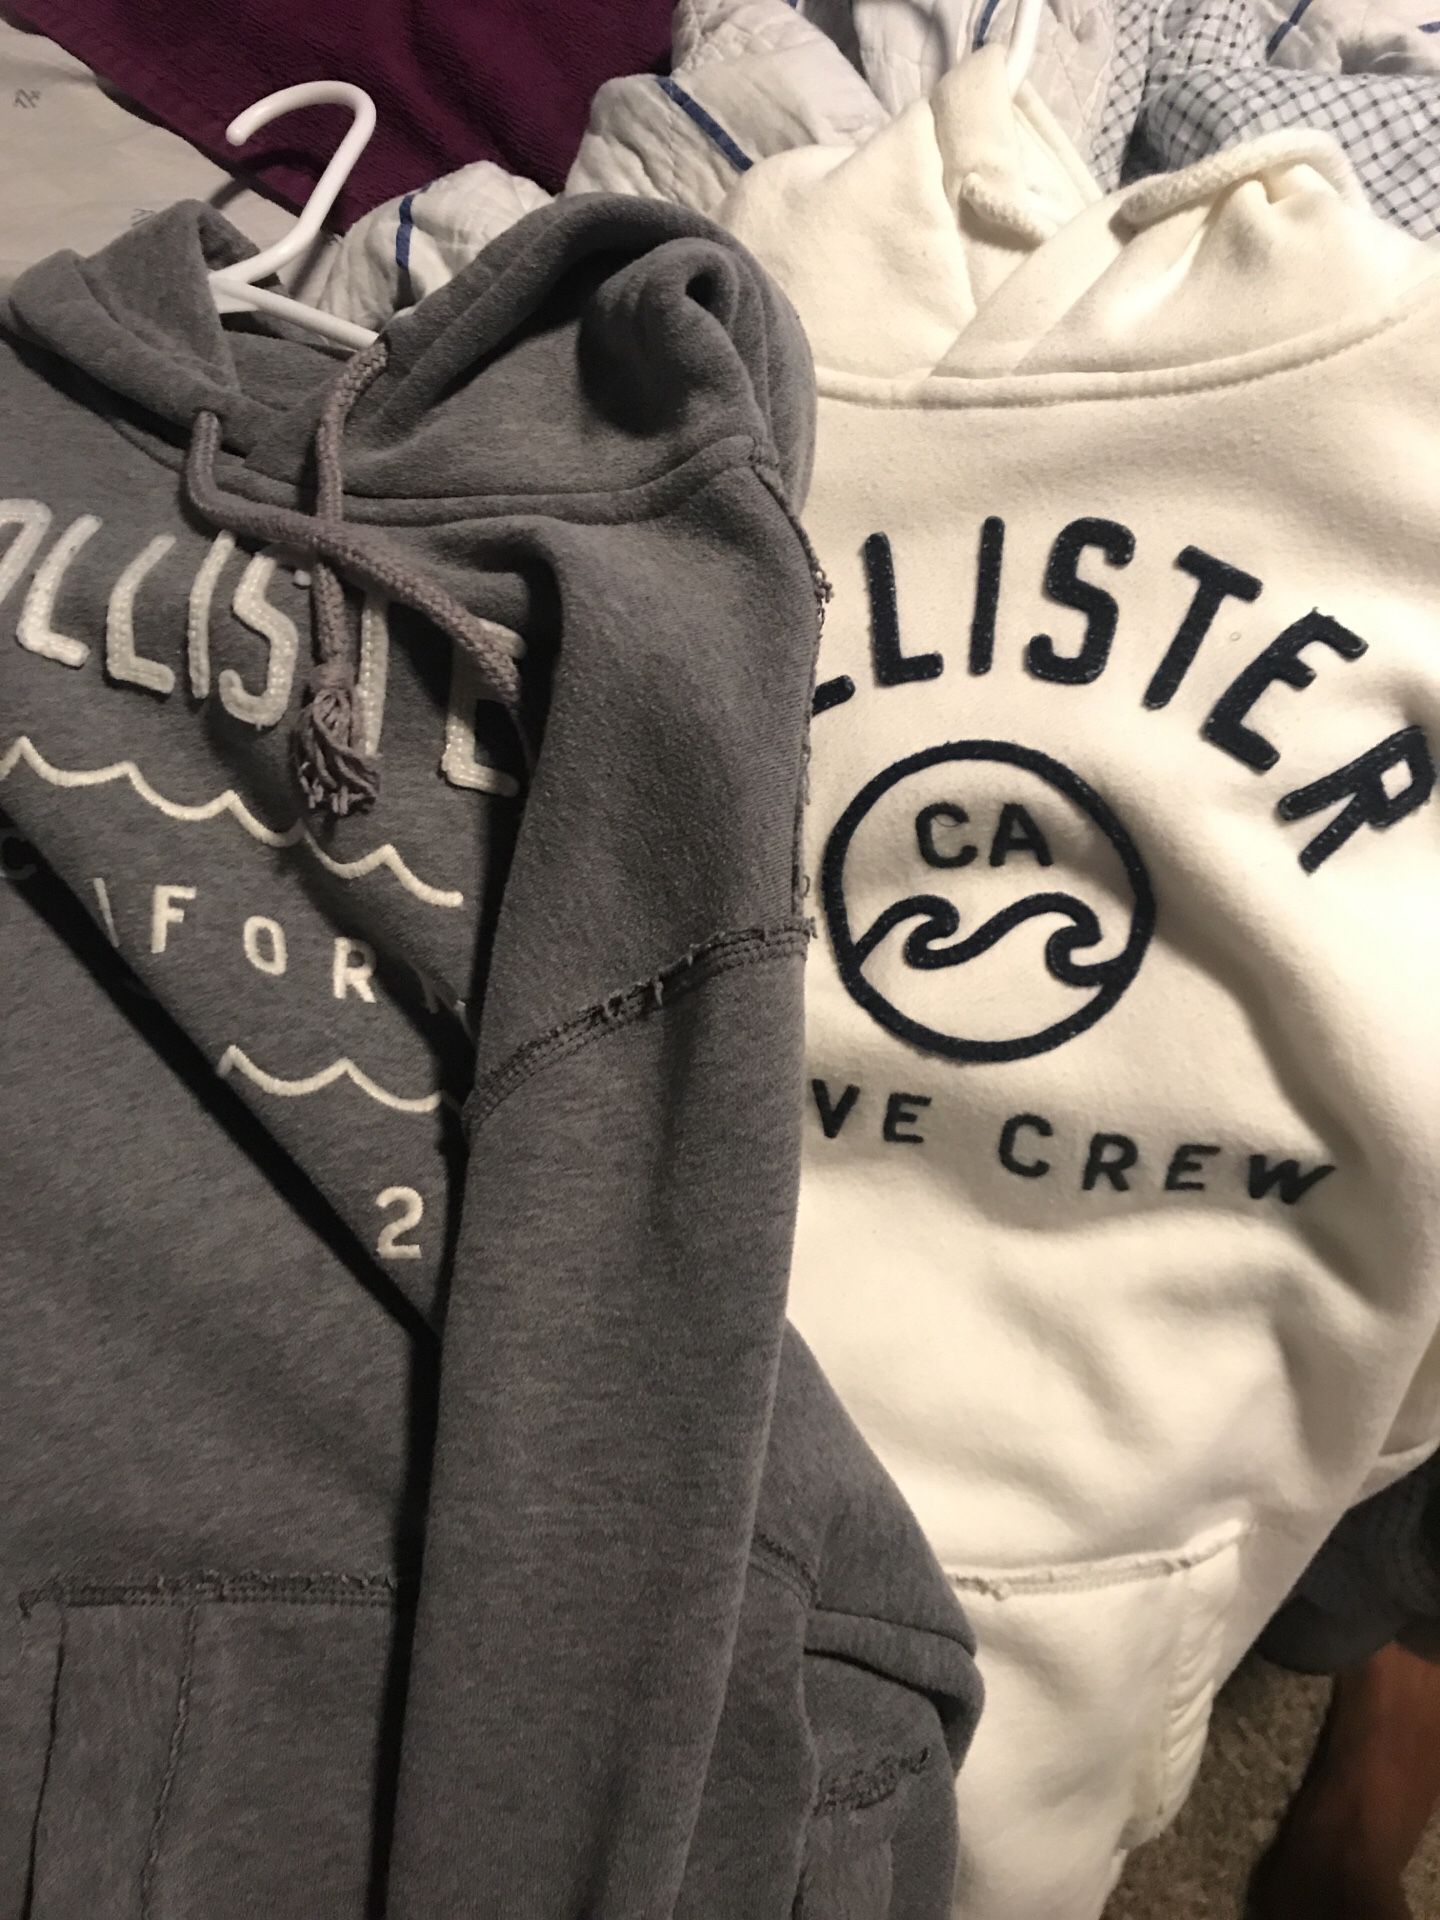 2 HOLLISTER hoodies, size large (fits medium too) $20 for both